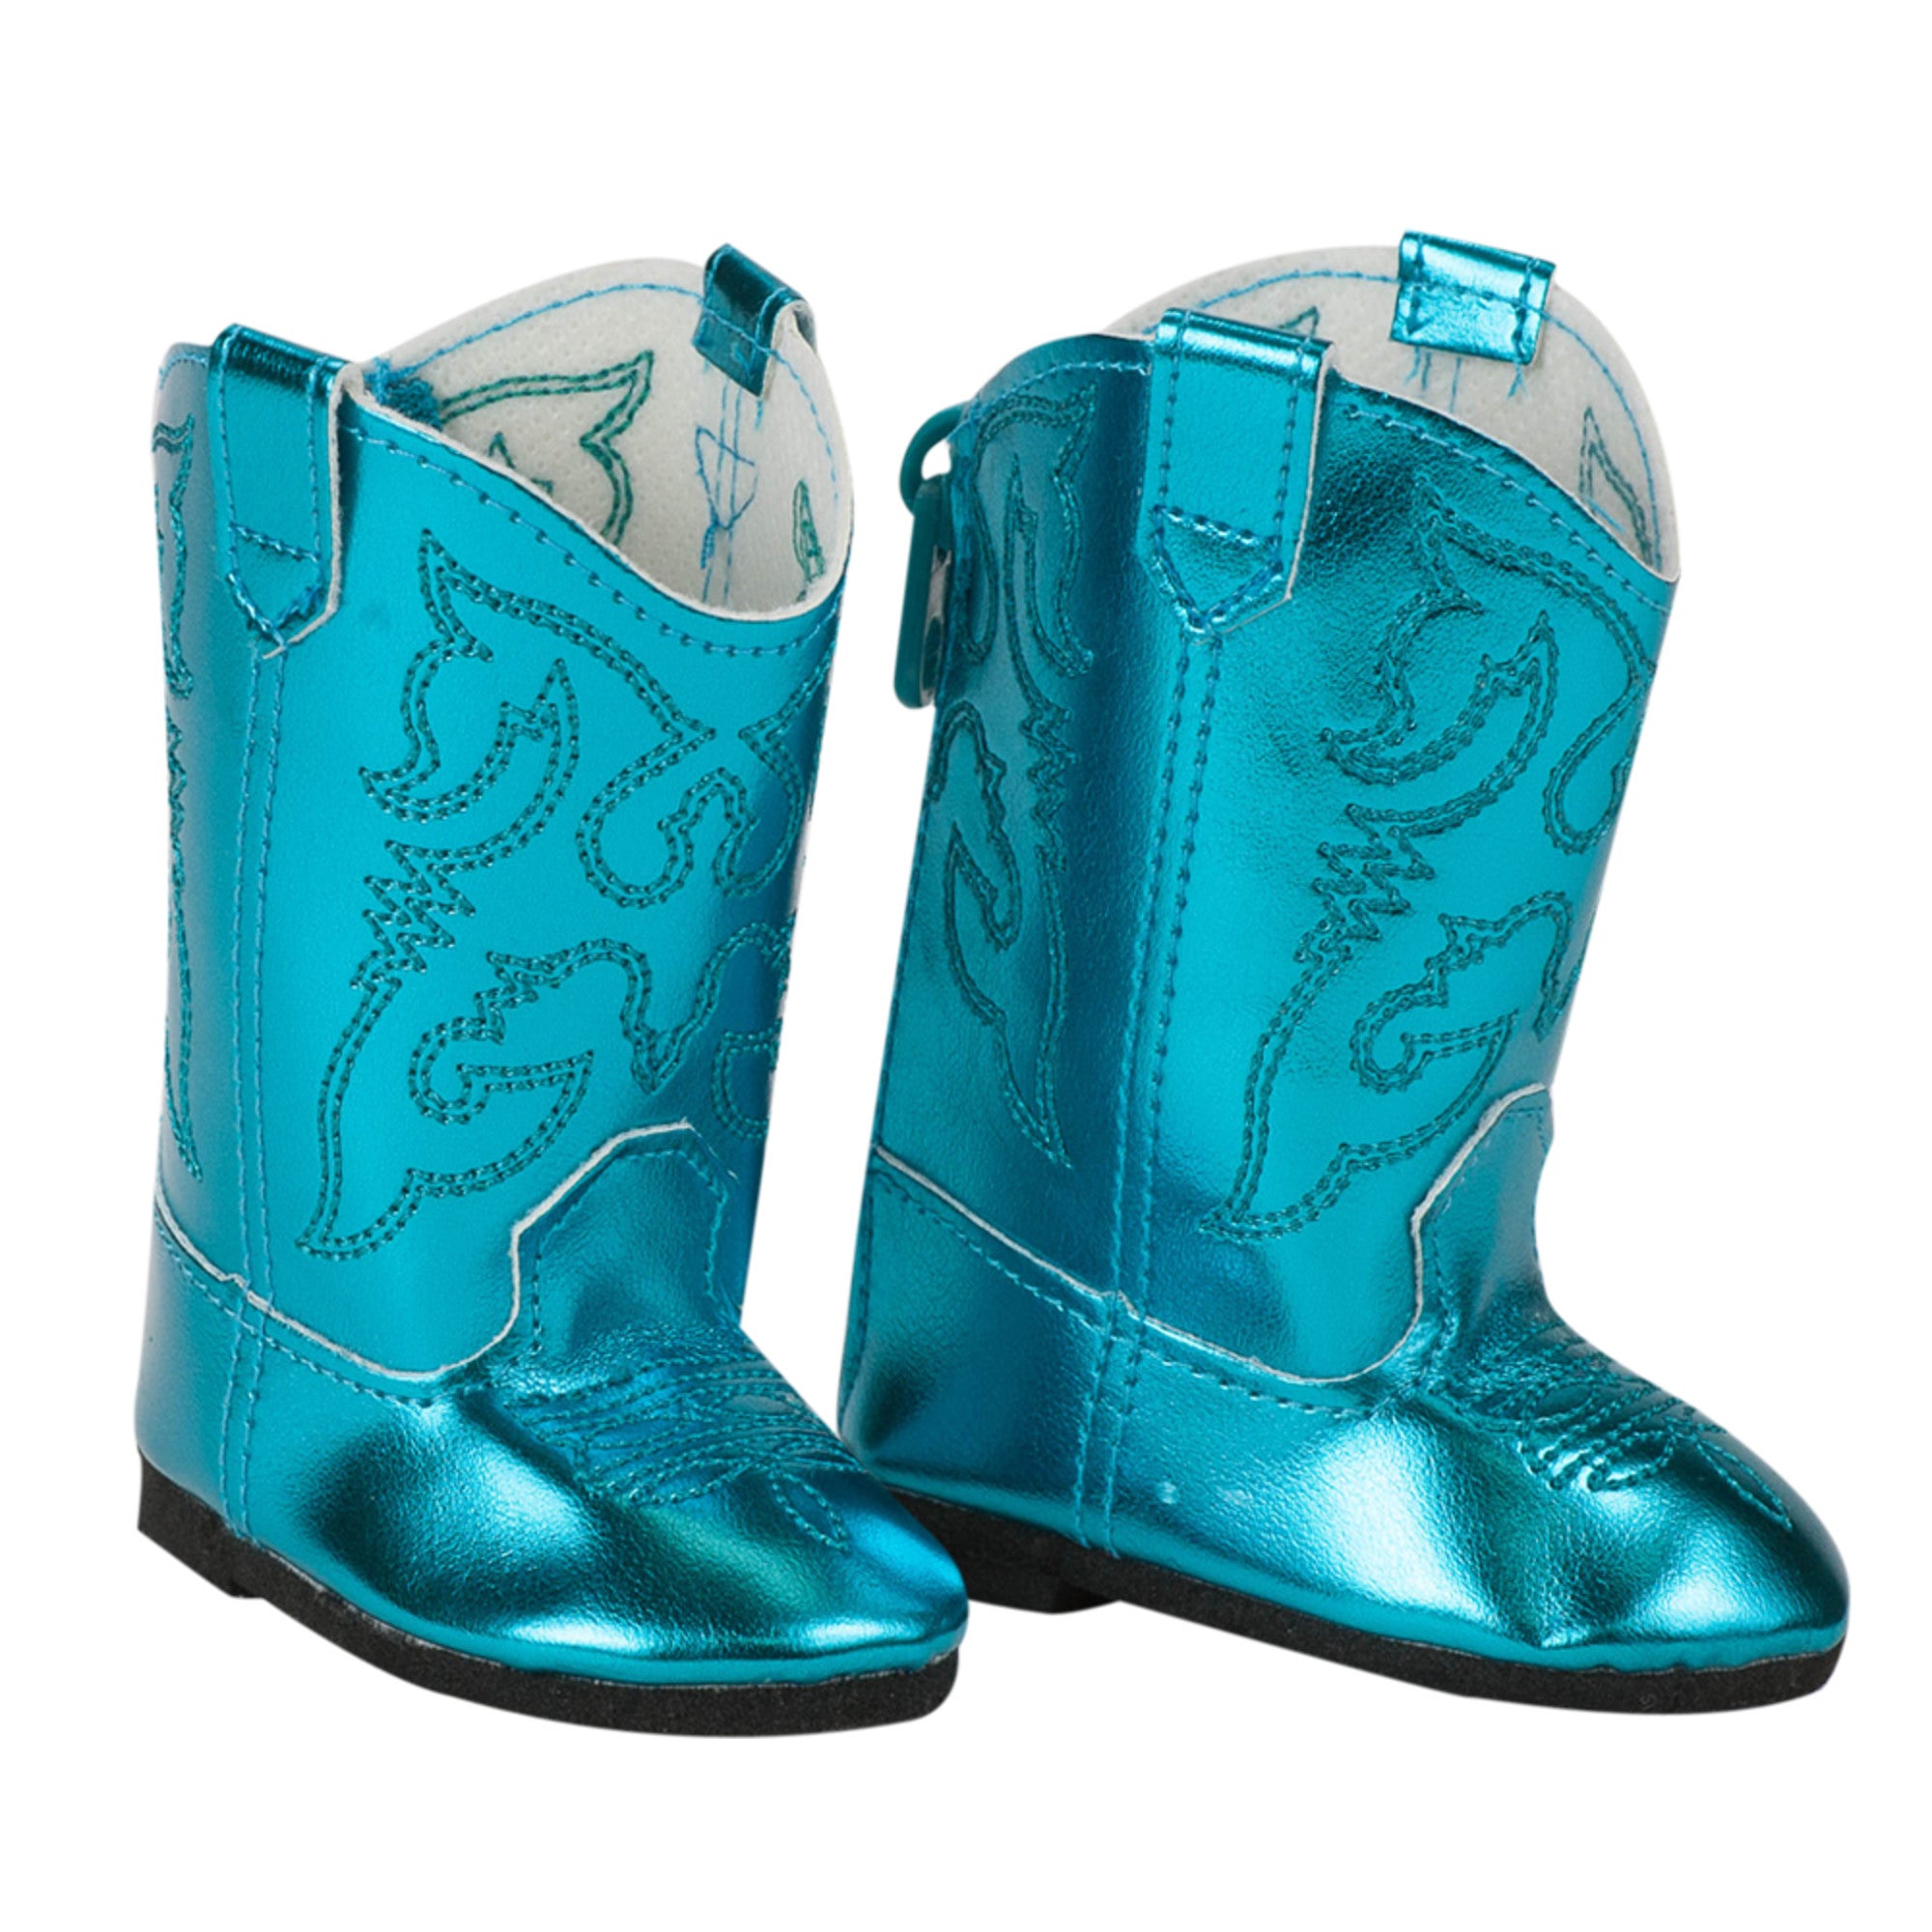 Sophia's Metallic Faux Leather Western Cowboy Boots with Stitched Details for 18" Dolls, Teal